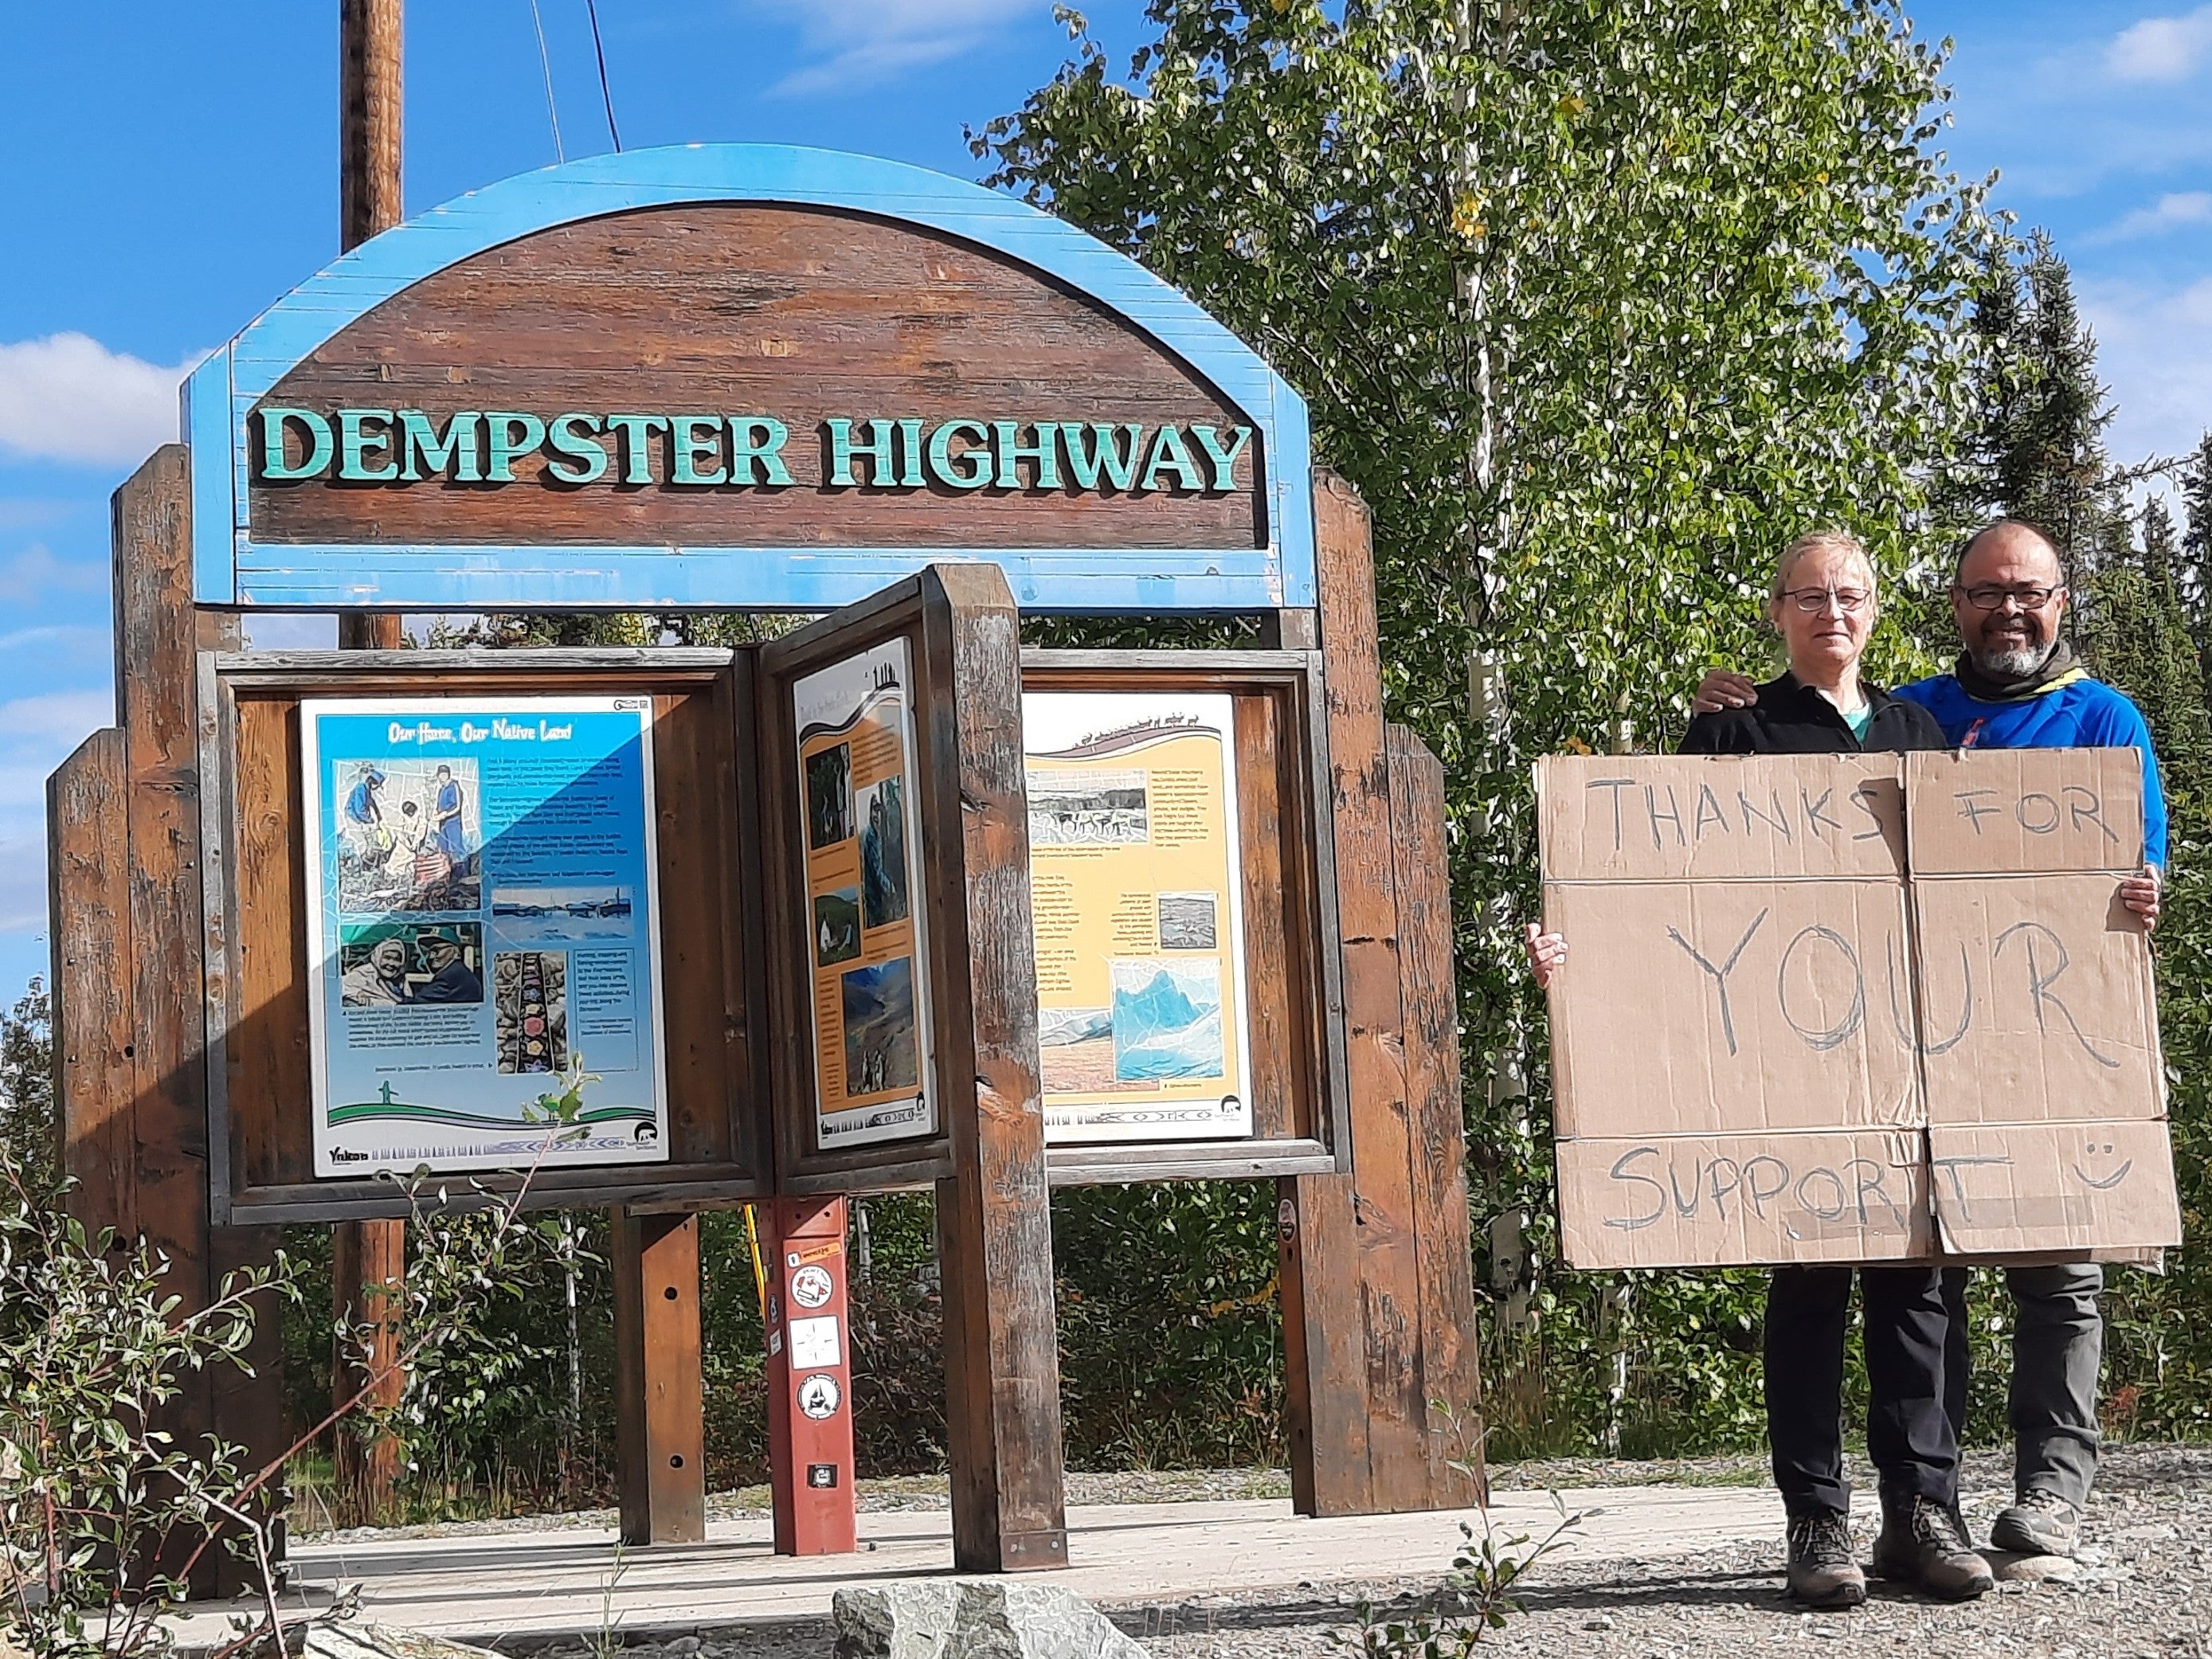 Maren Oelbermann and Pedro Gonzalez Hernandez hold a sign saying Thanks for your support, at the sign marking the start of the Dempster Highway.